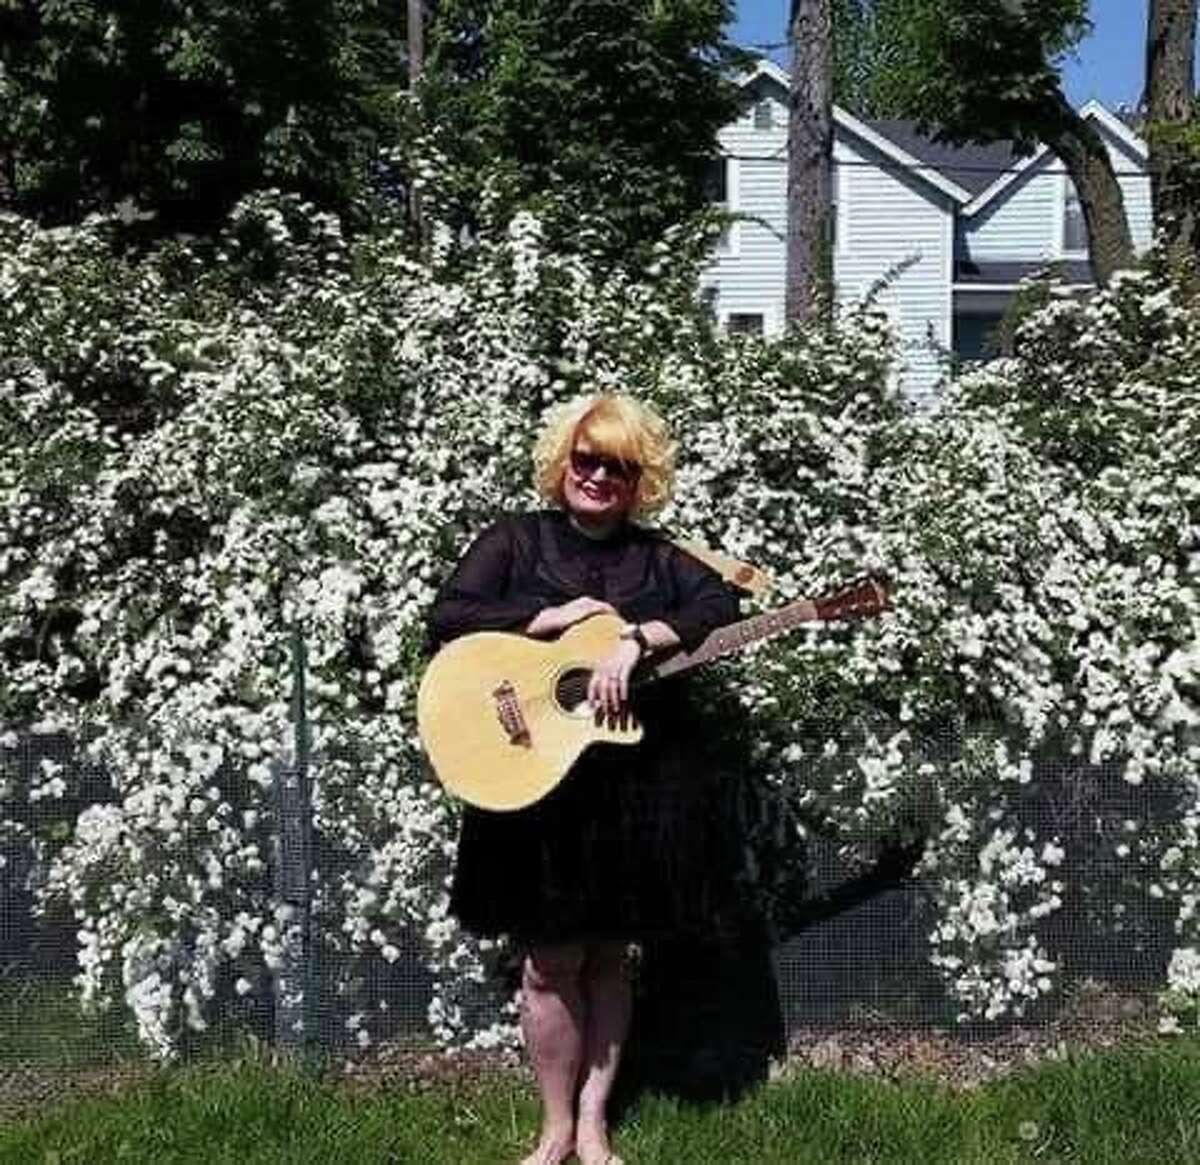 Manistee musician Jamie Herbert has been writing her own music since she was 15 years old.